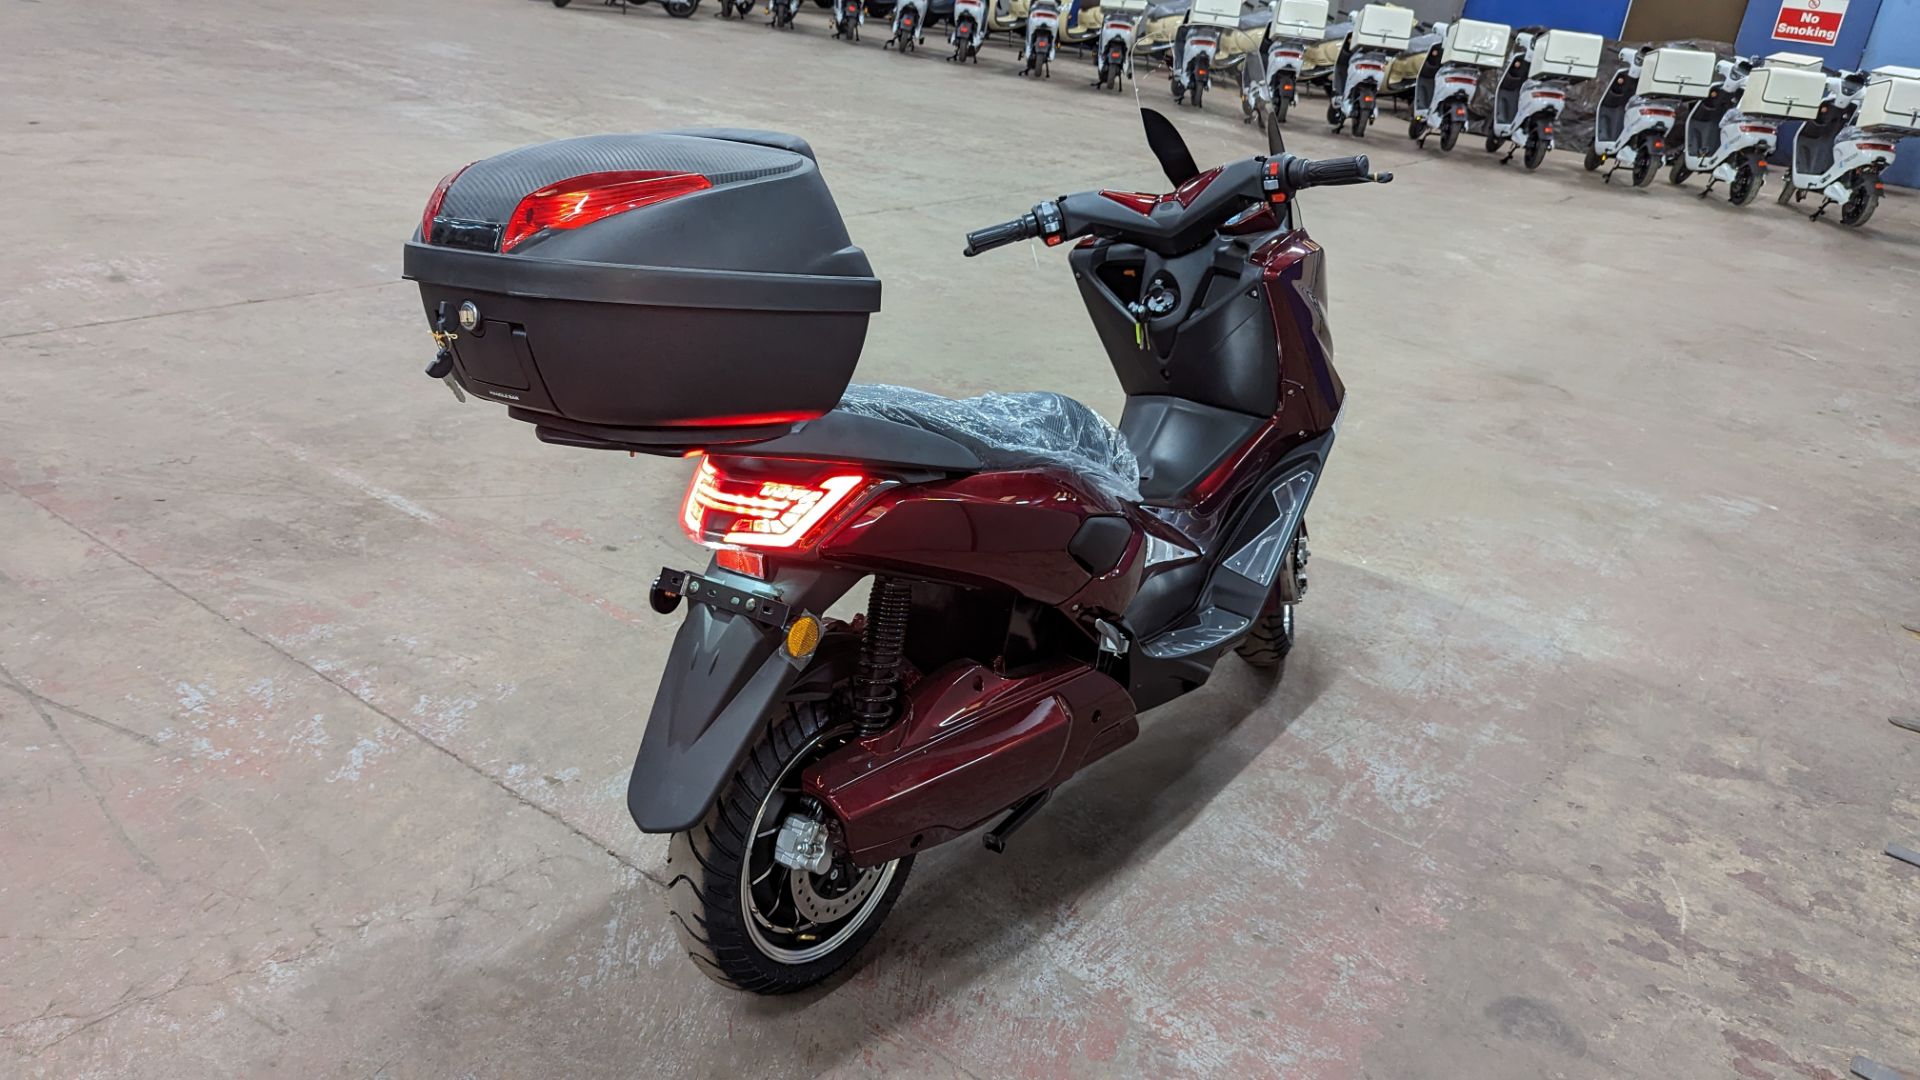 Model 65 Electric High Power Motorbike: Delivery Miles (only 1 recorded km), wine red body with blac - Image 4 of 17